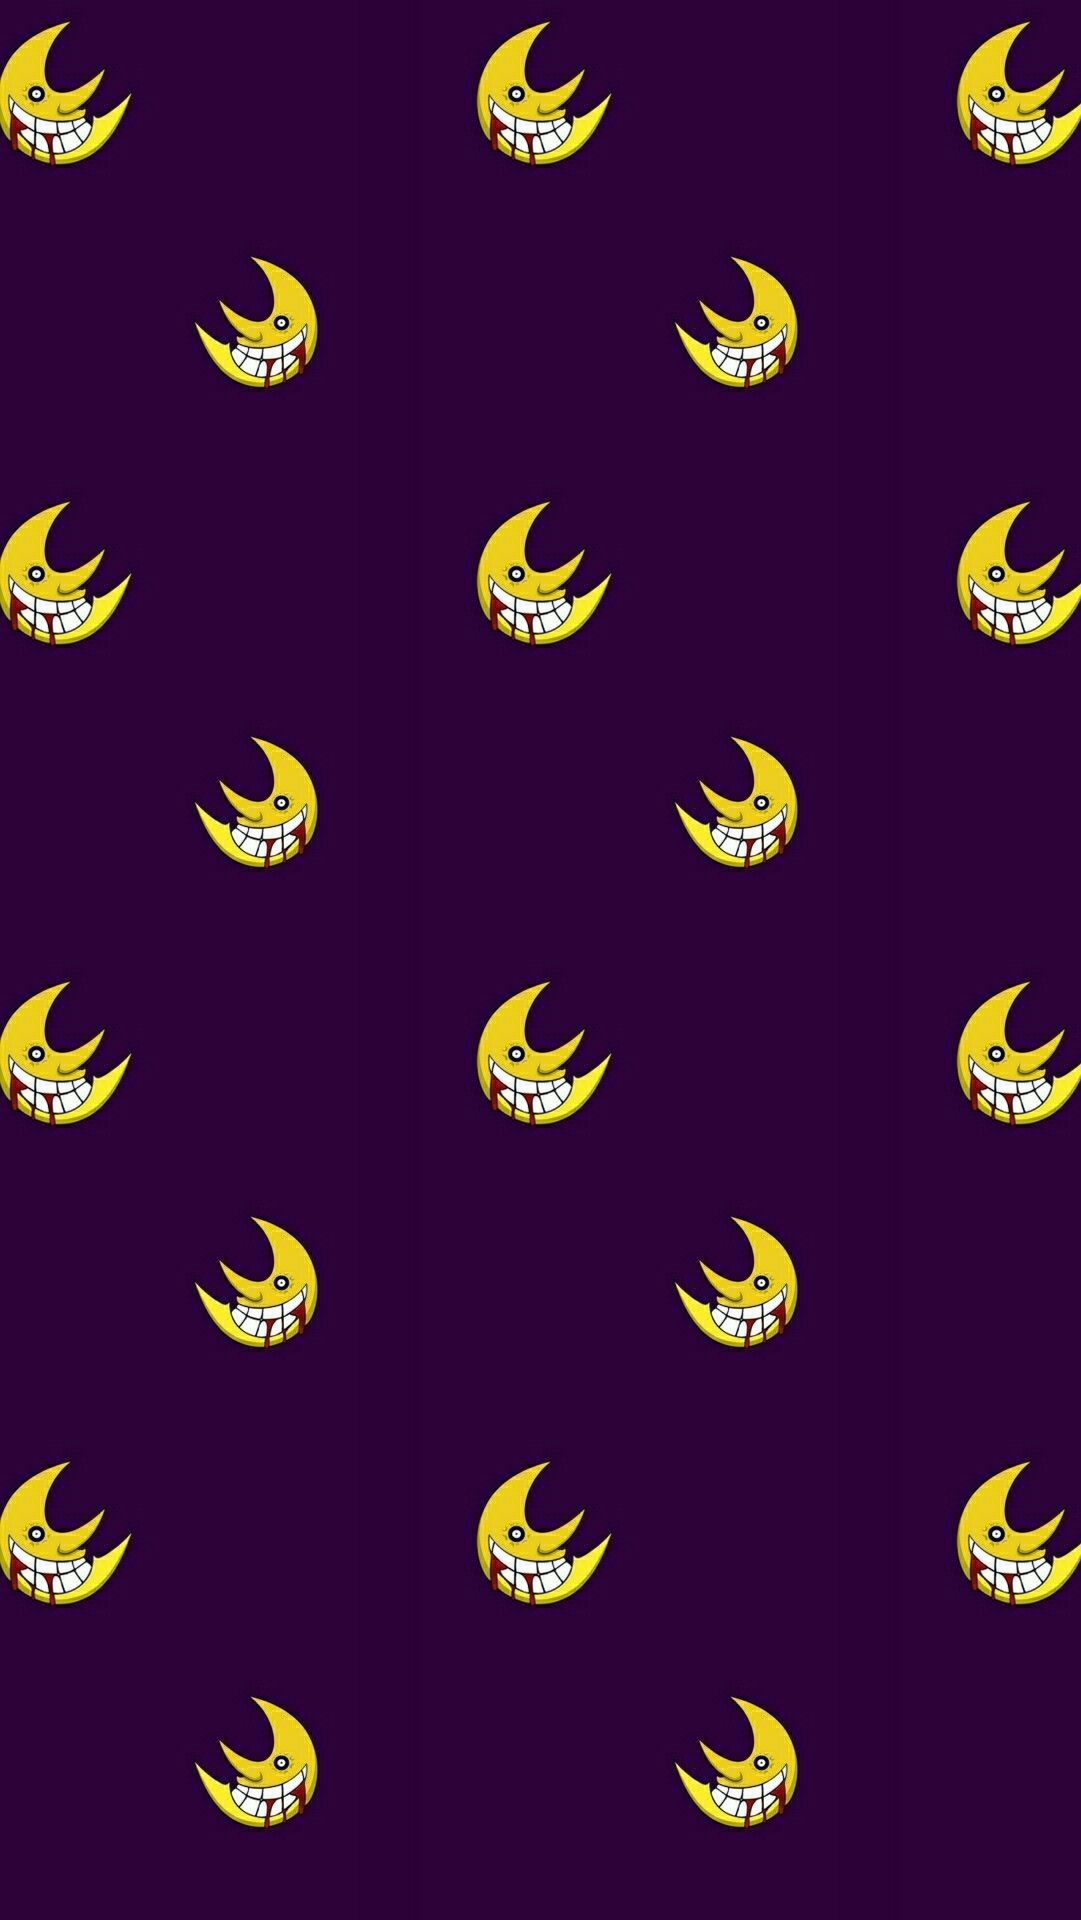 Soul Eater Moon Wallpapers